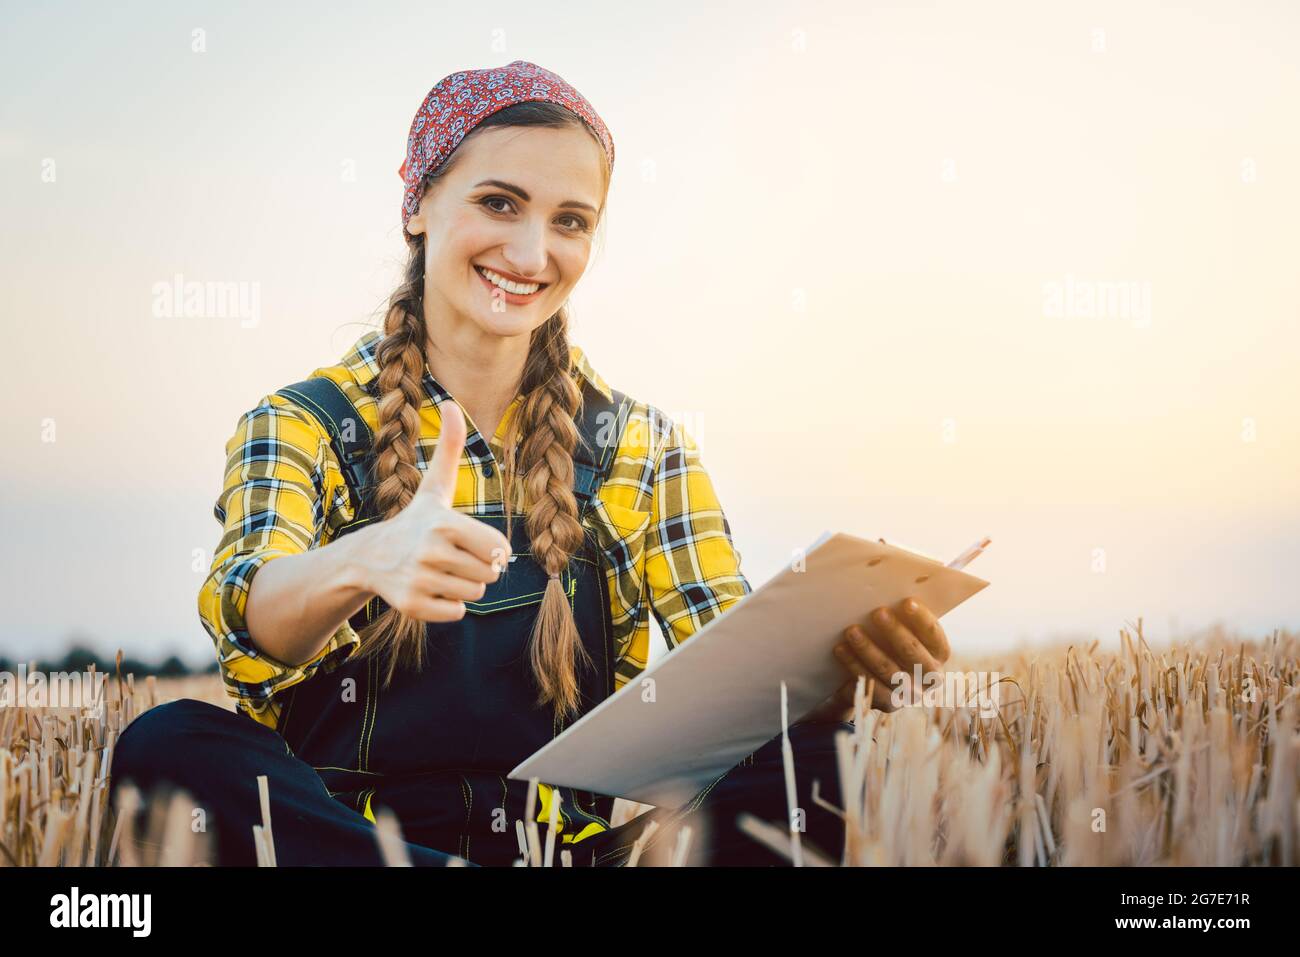 Successful farmer having harvest finished showing thumps-up Stock Photo